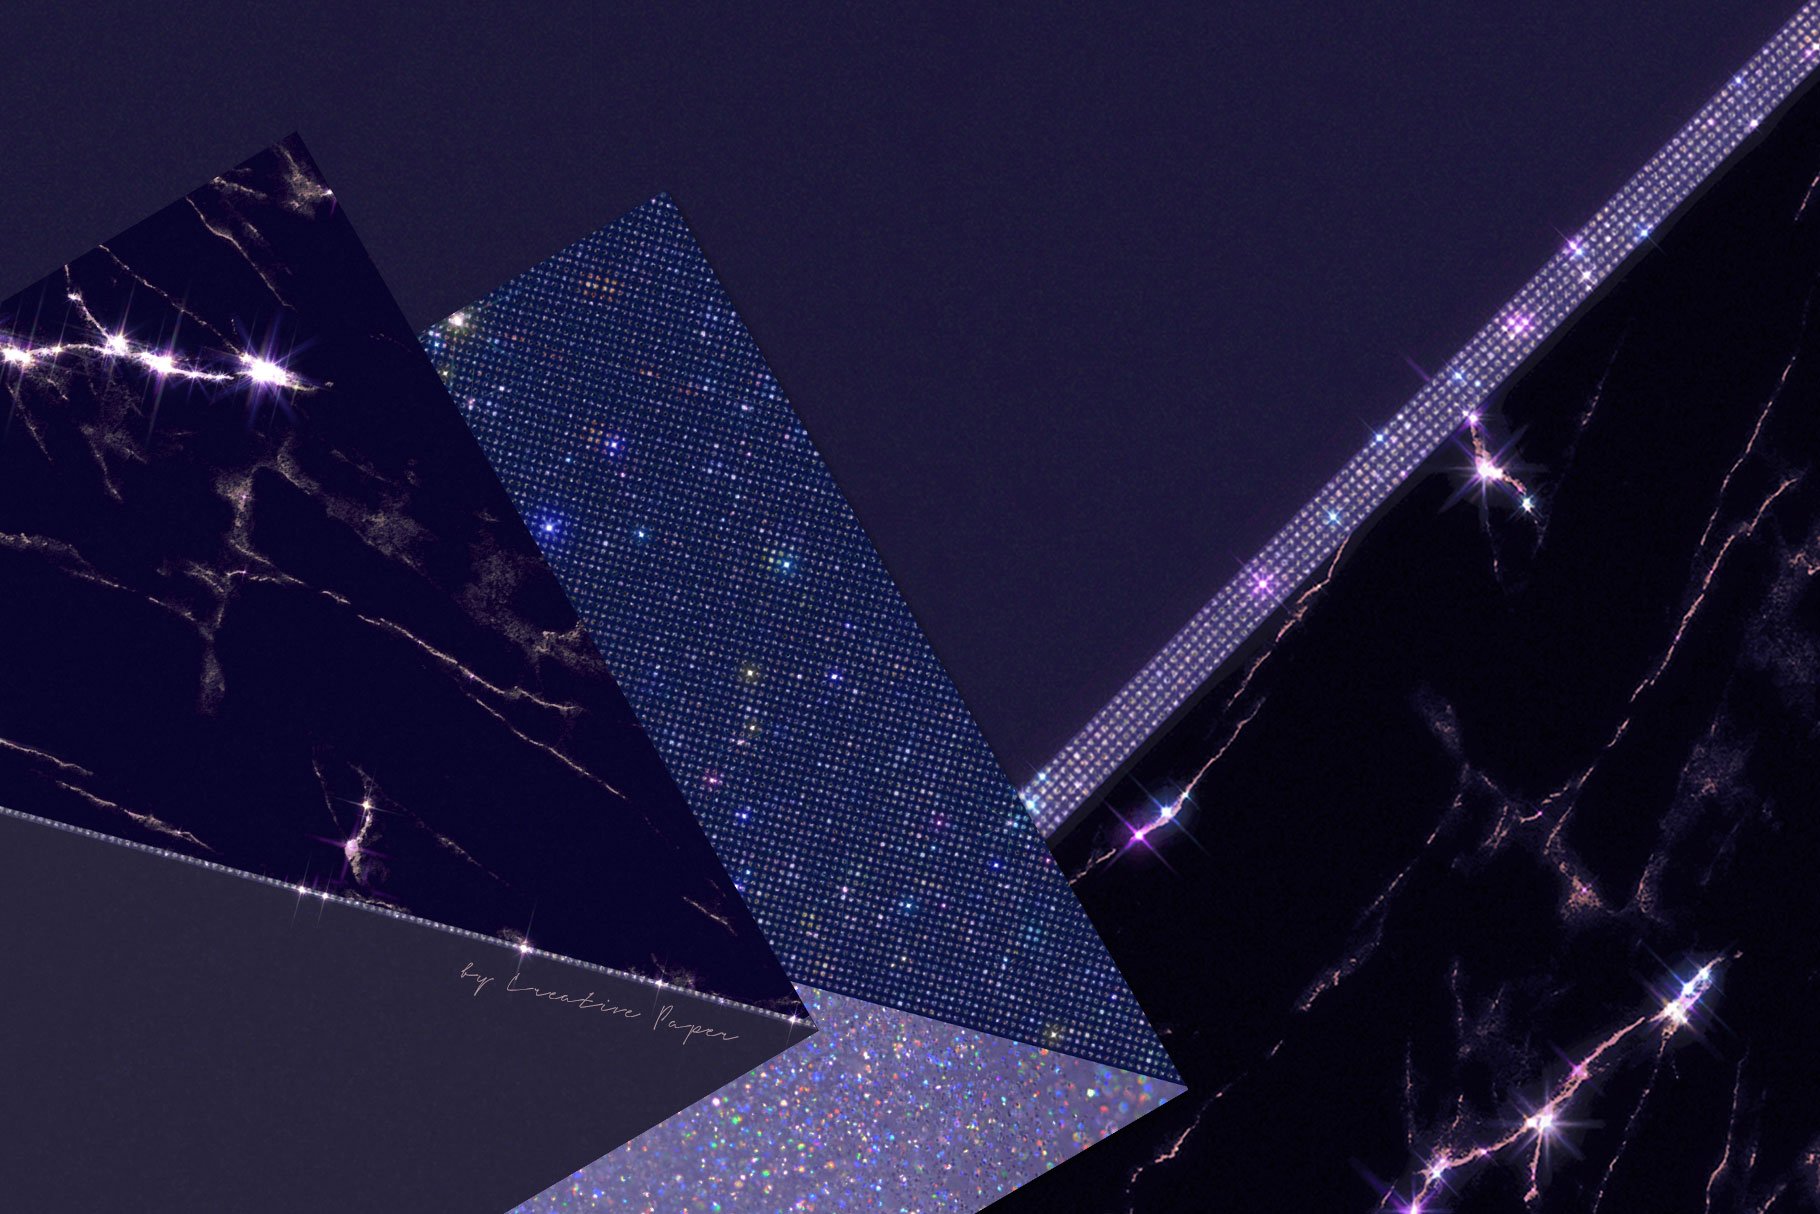 Glitzy Marble Textures preview image.